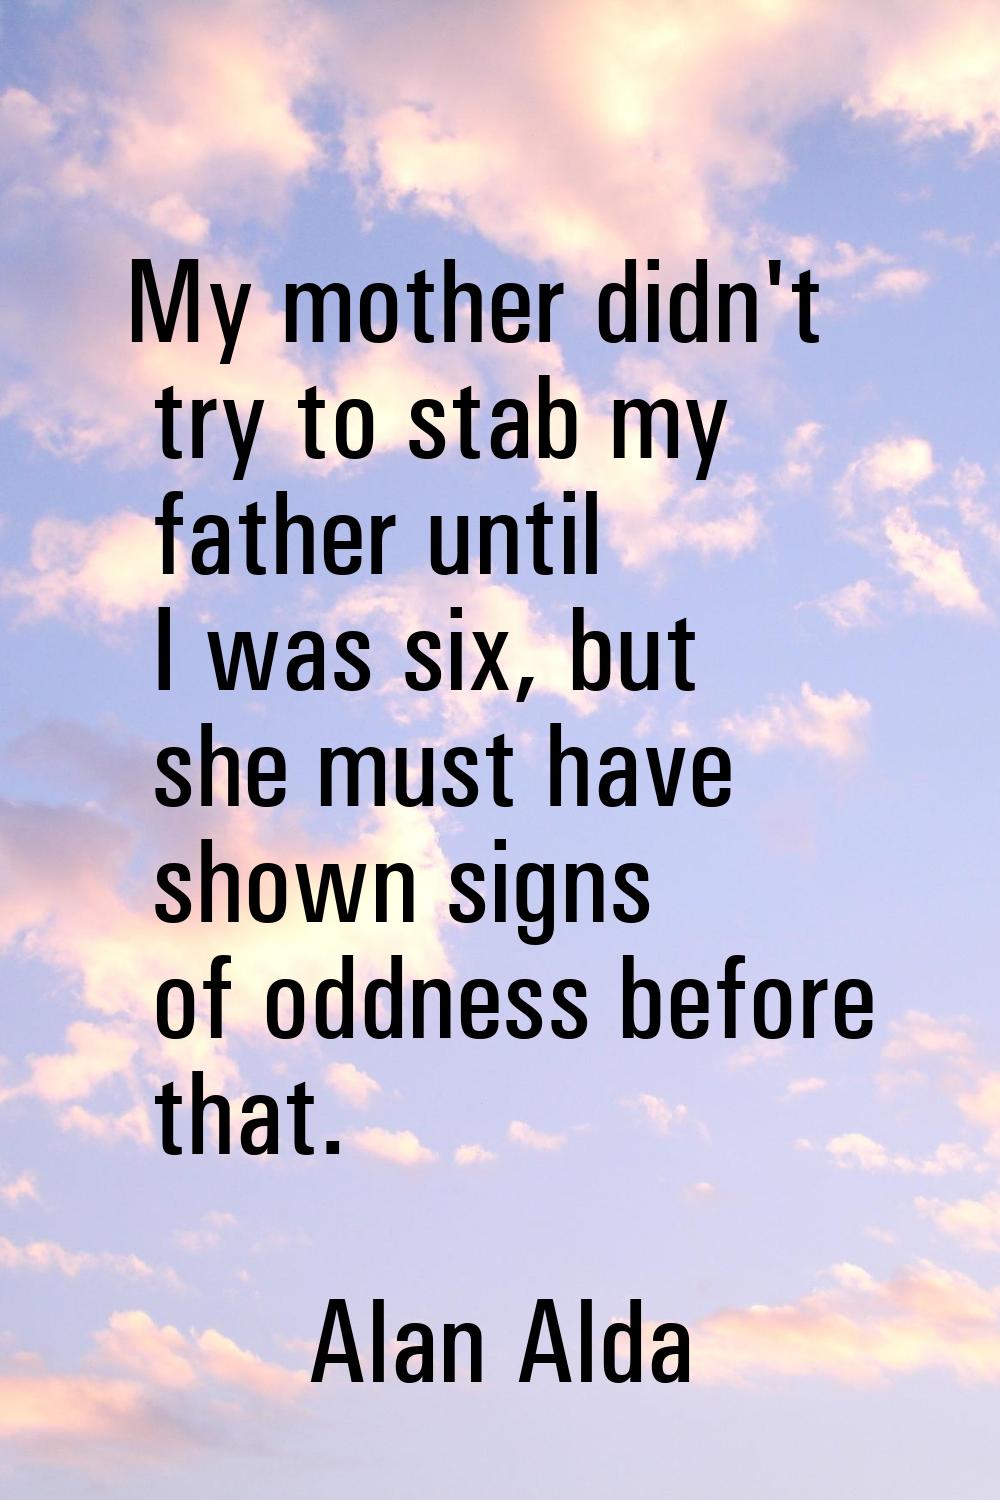 My mother didn't try to stab my father until I was six, but she must have shown signs of oddness be